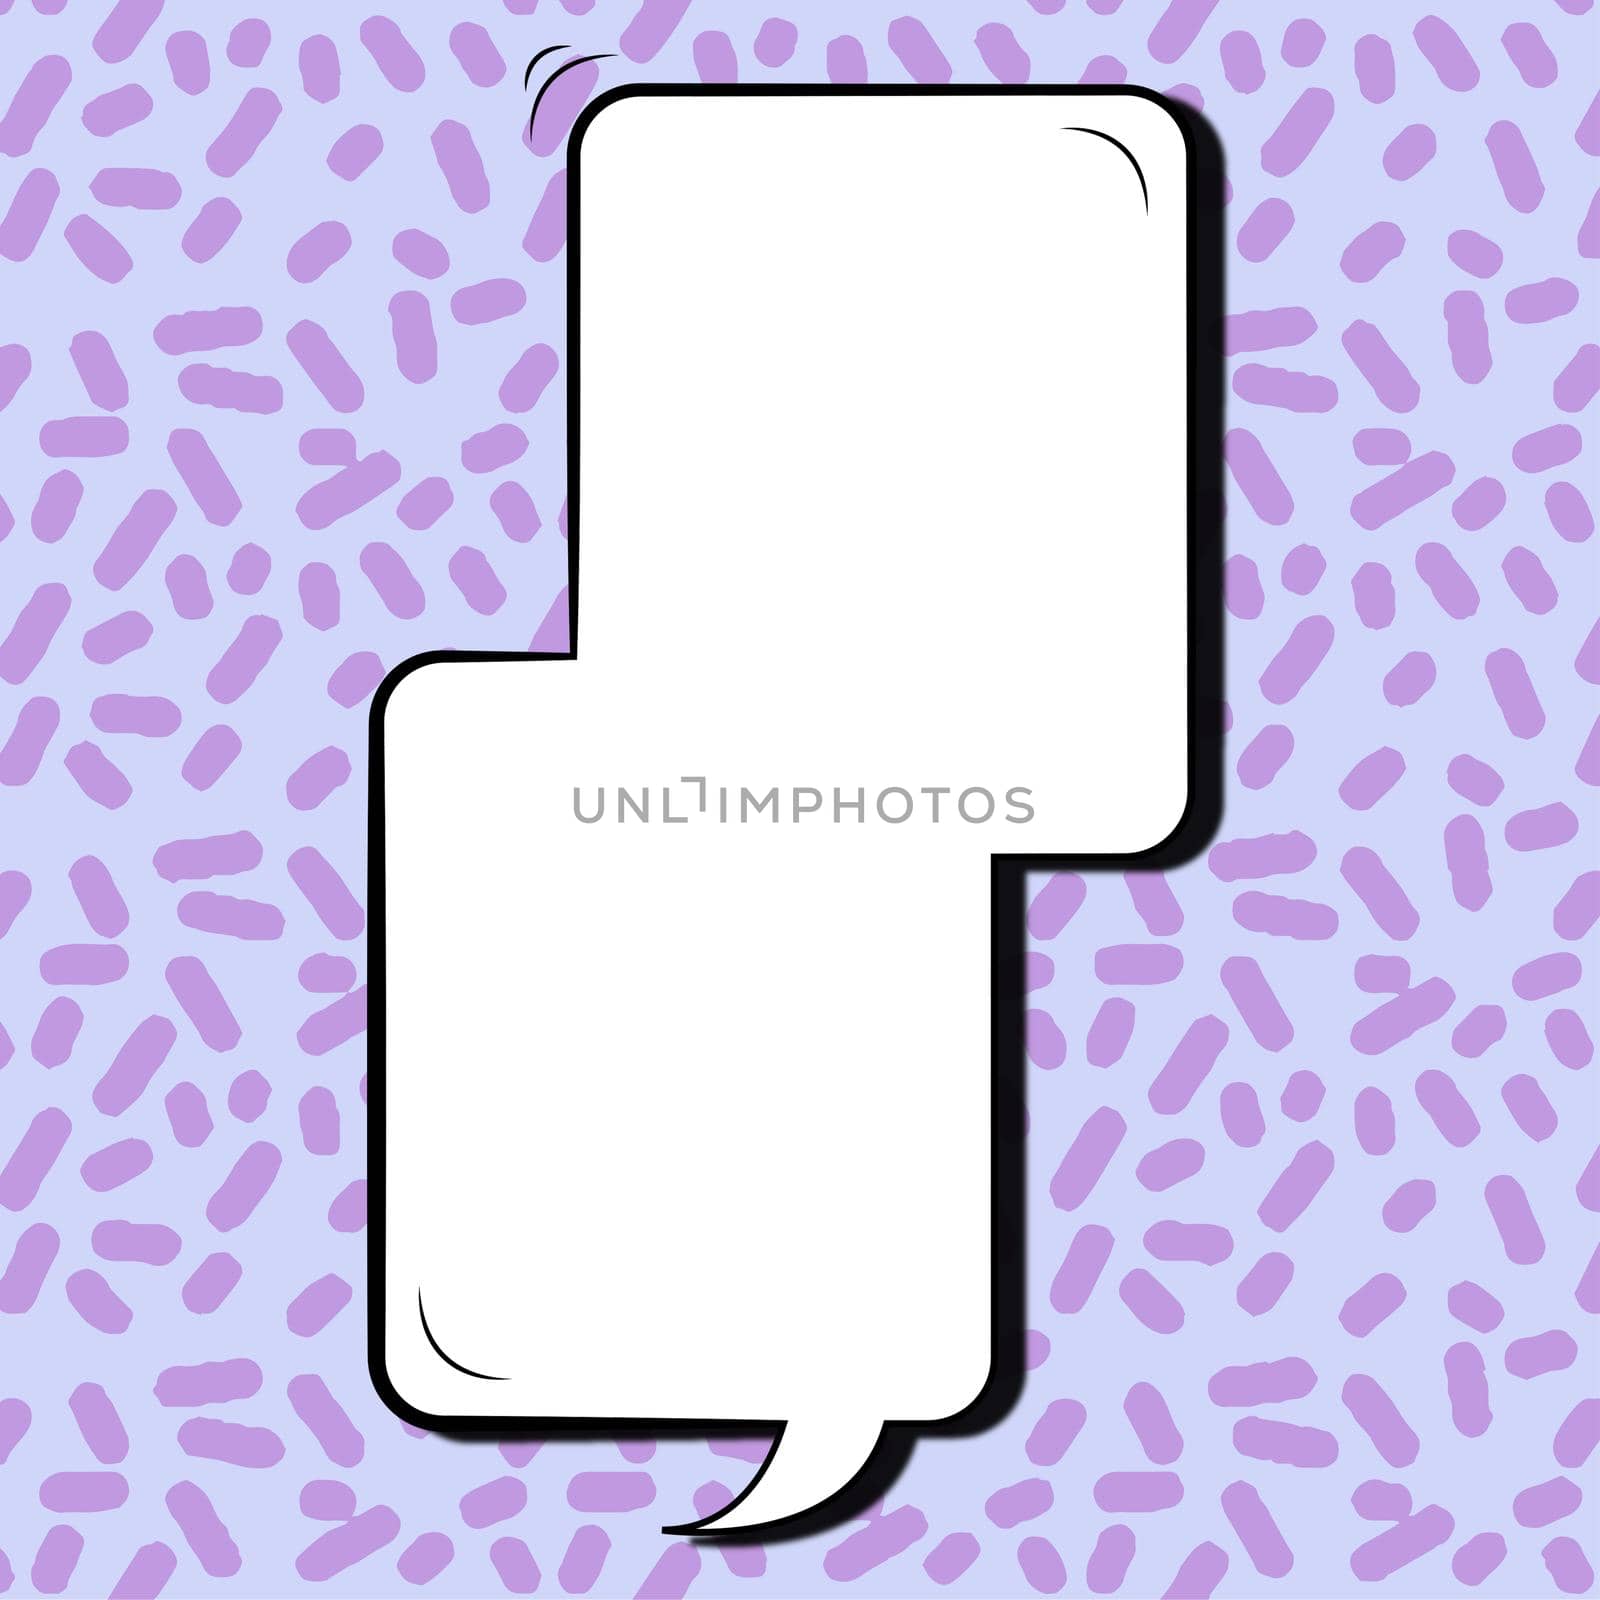 Cartoon Style Chat Box With Copy Space Isolated Against Color Doodles. Design Of Empty Text S Representing Social Networking Media And Communication Concept. by nialowwa